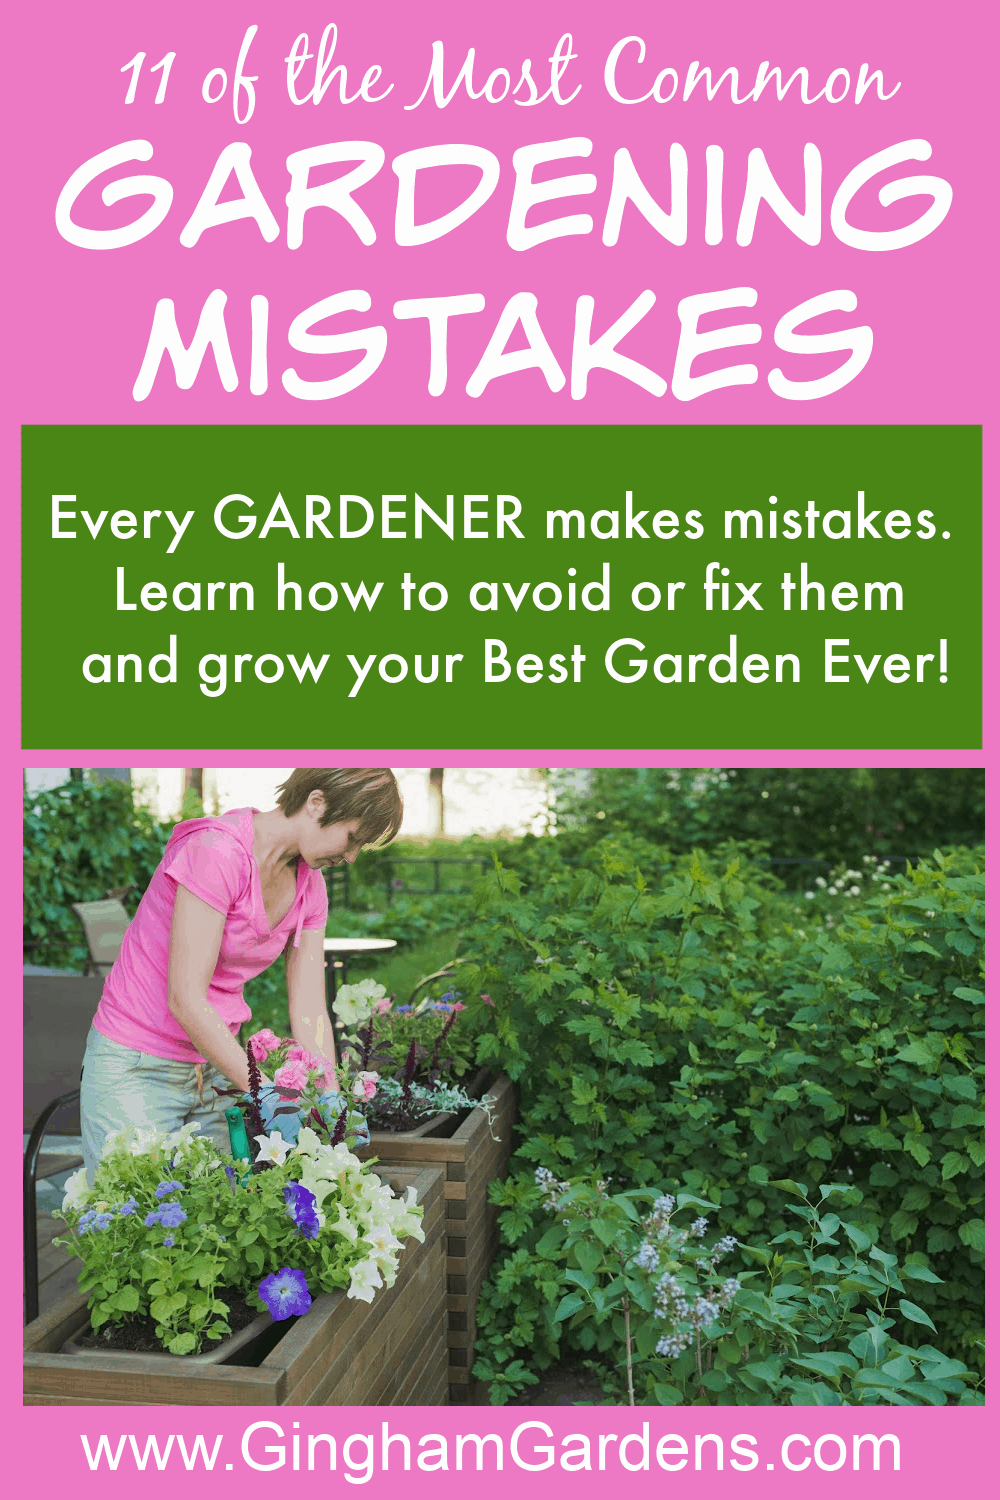 Image of a Gardener with text overlay - 11 of the most common Gardening Mistakes